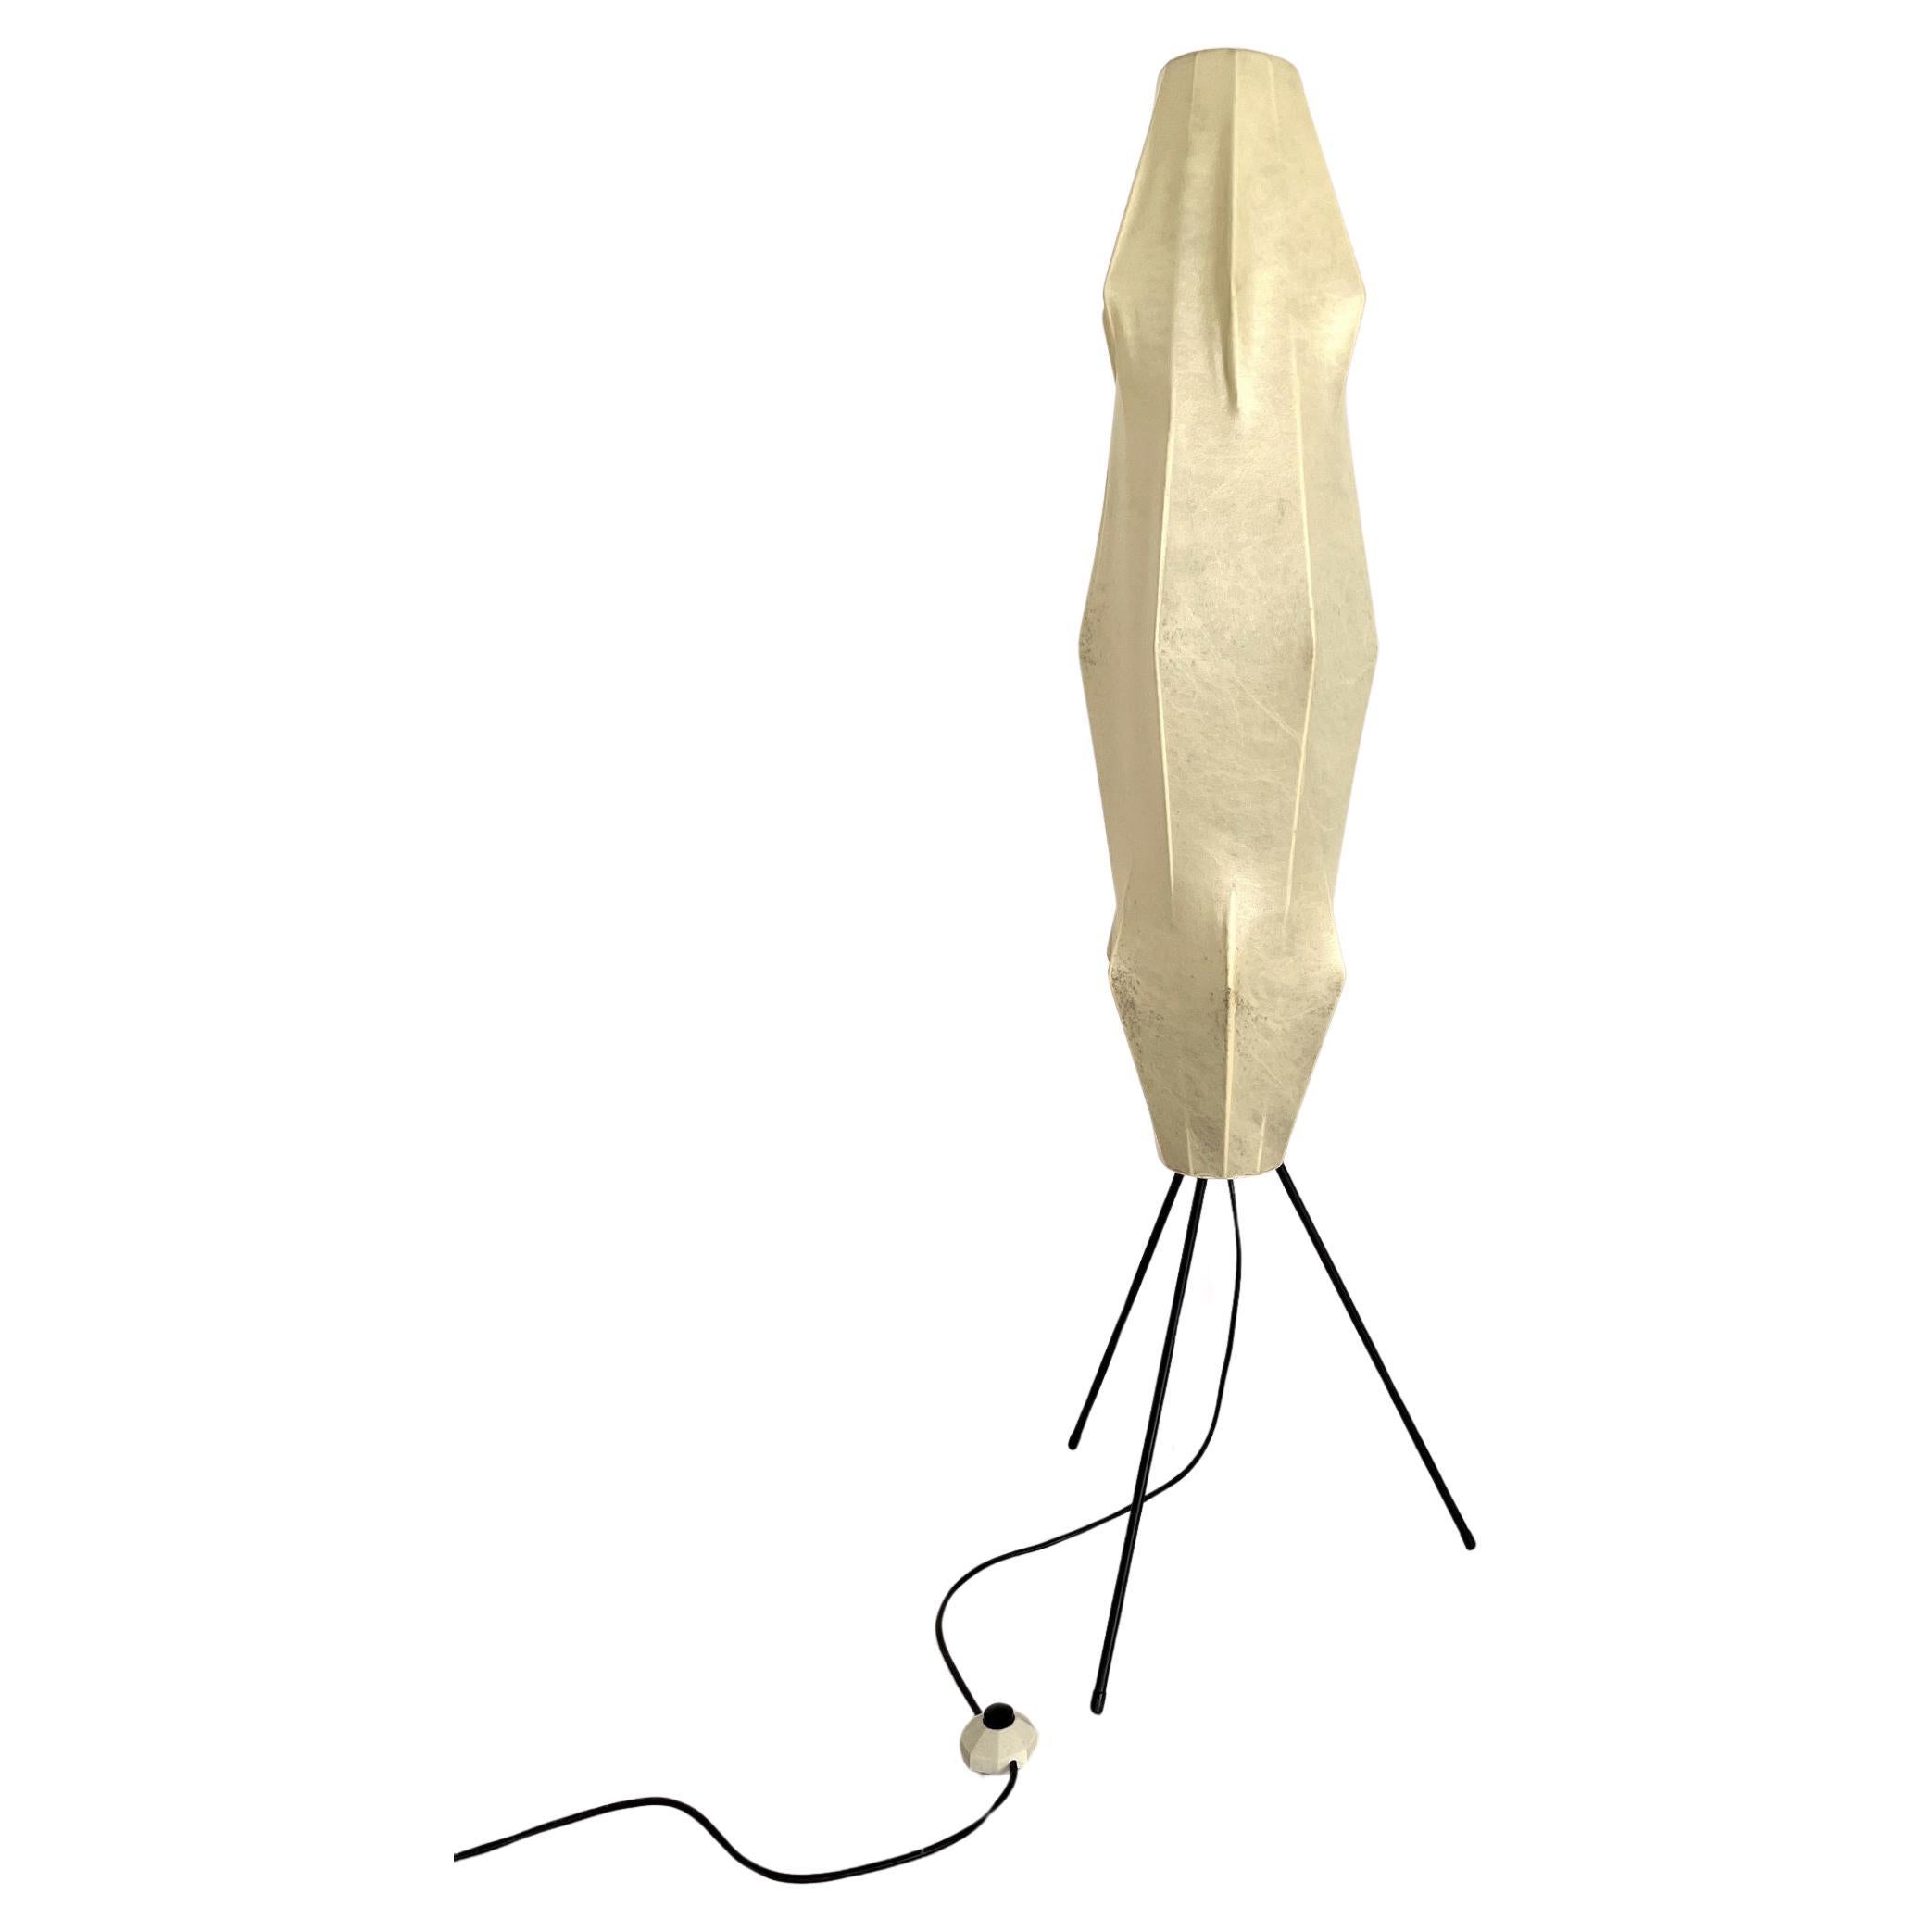 Midcentury Cocoon Floor Lamp with Metal Base by Goldkant, 1960s